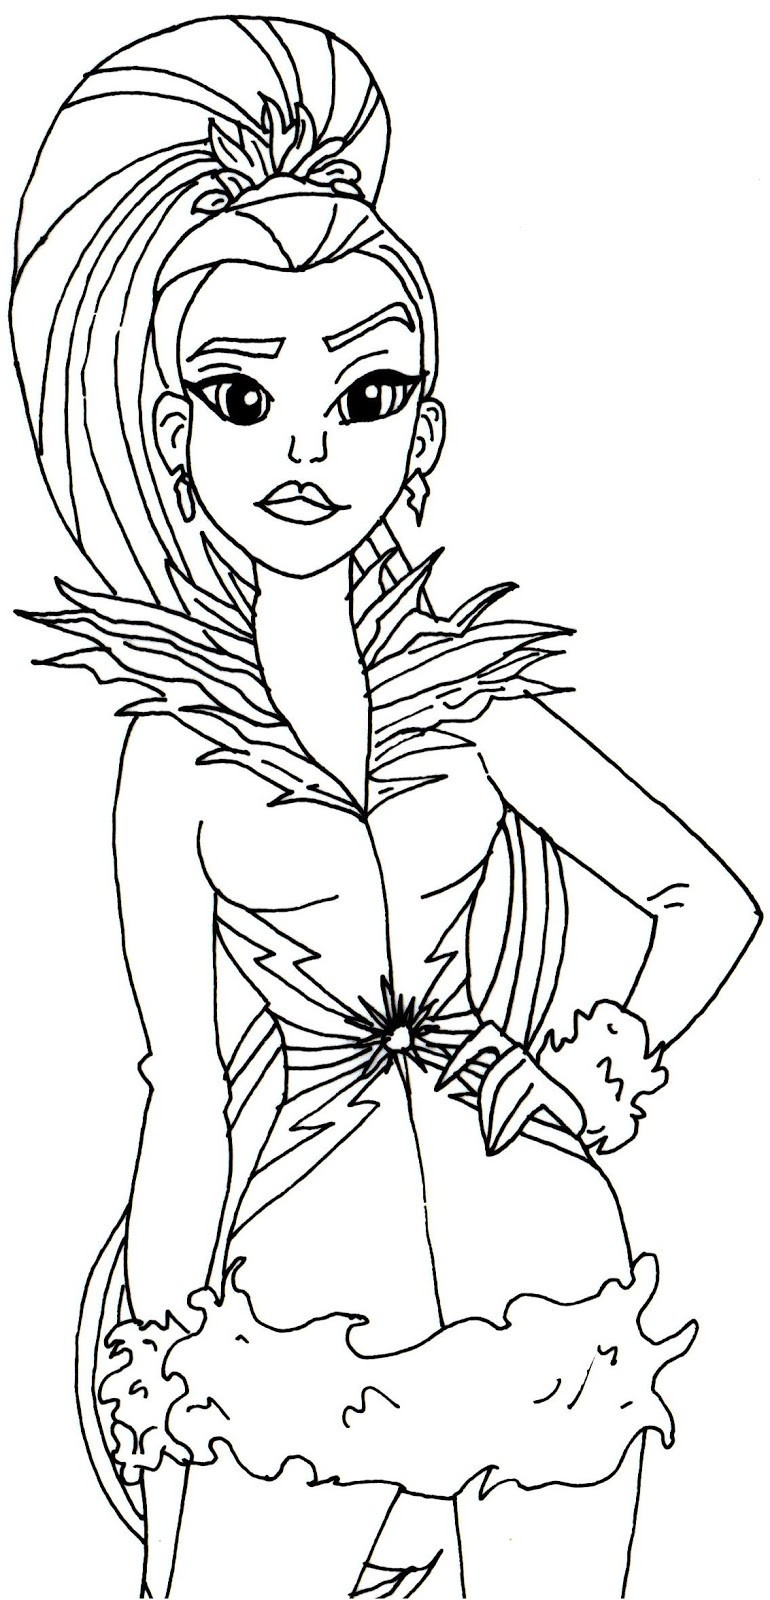 Super Hero Coloring Book Pages
 Dc Superhero Girls Coloring Sheets thekindproject